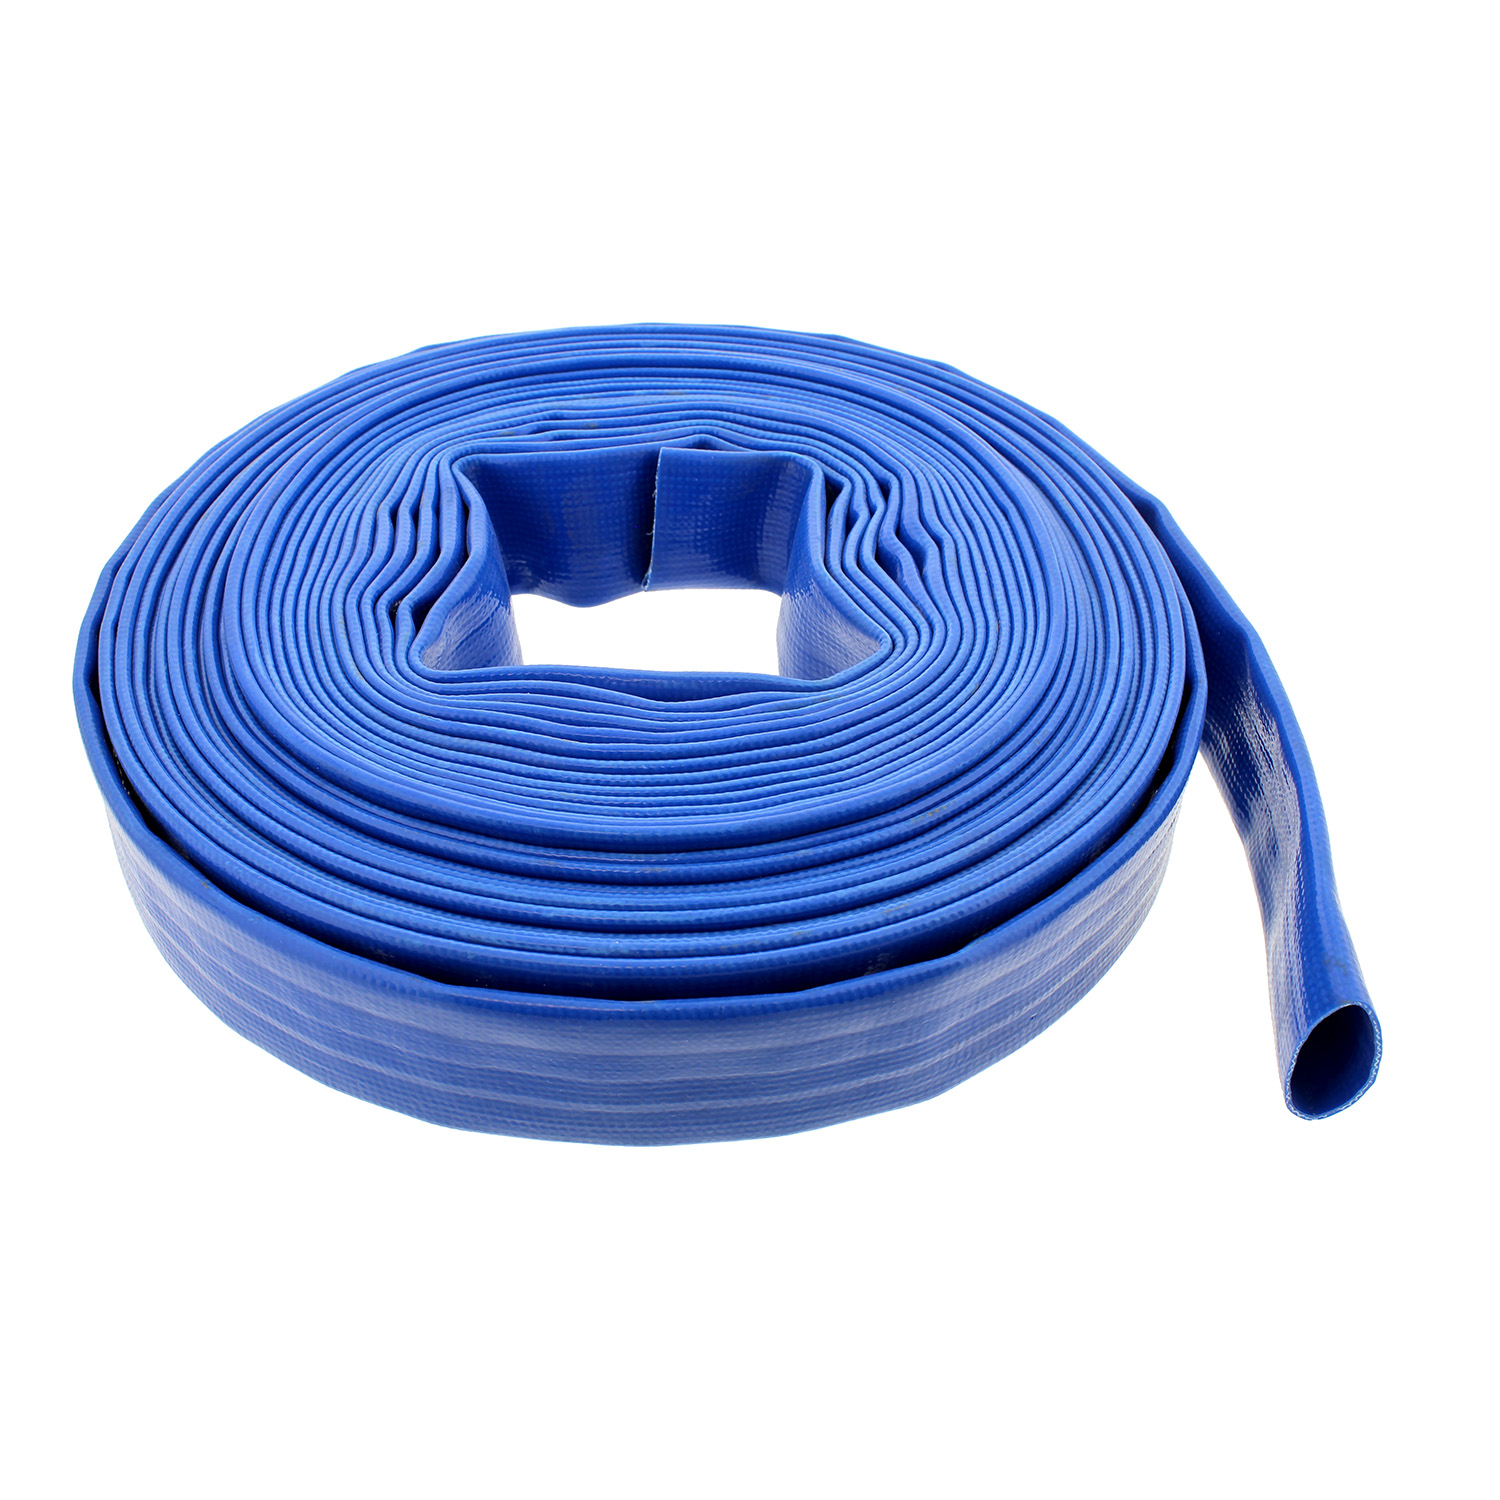 Featured image for “Discharge Hose – 50′”